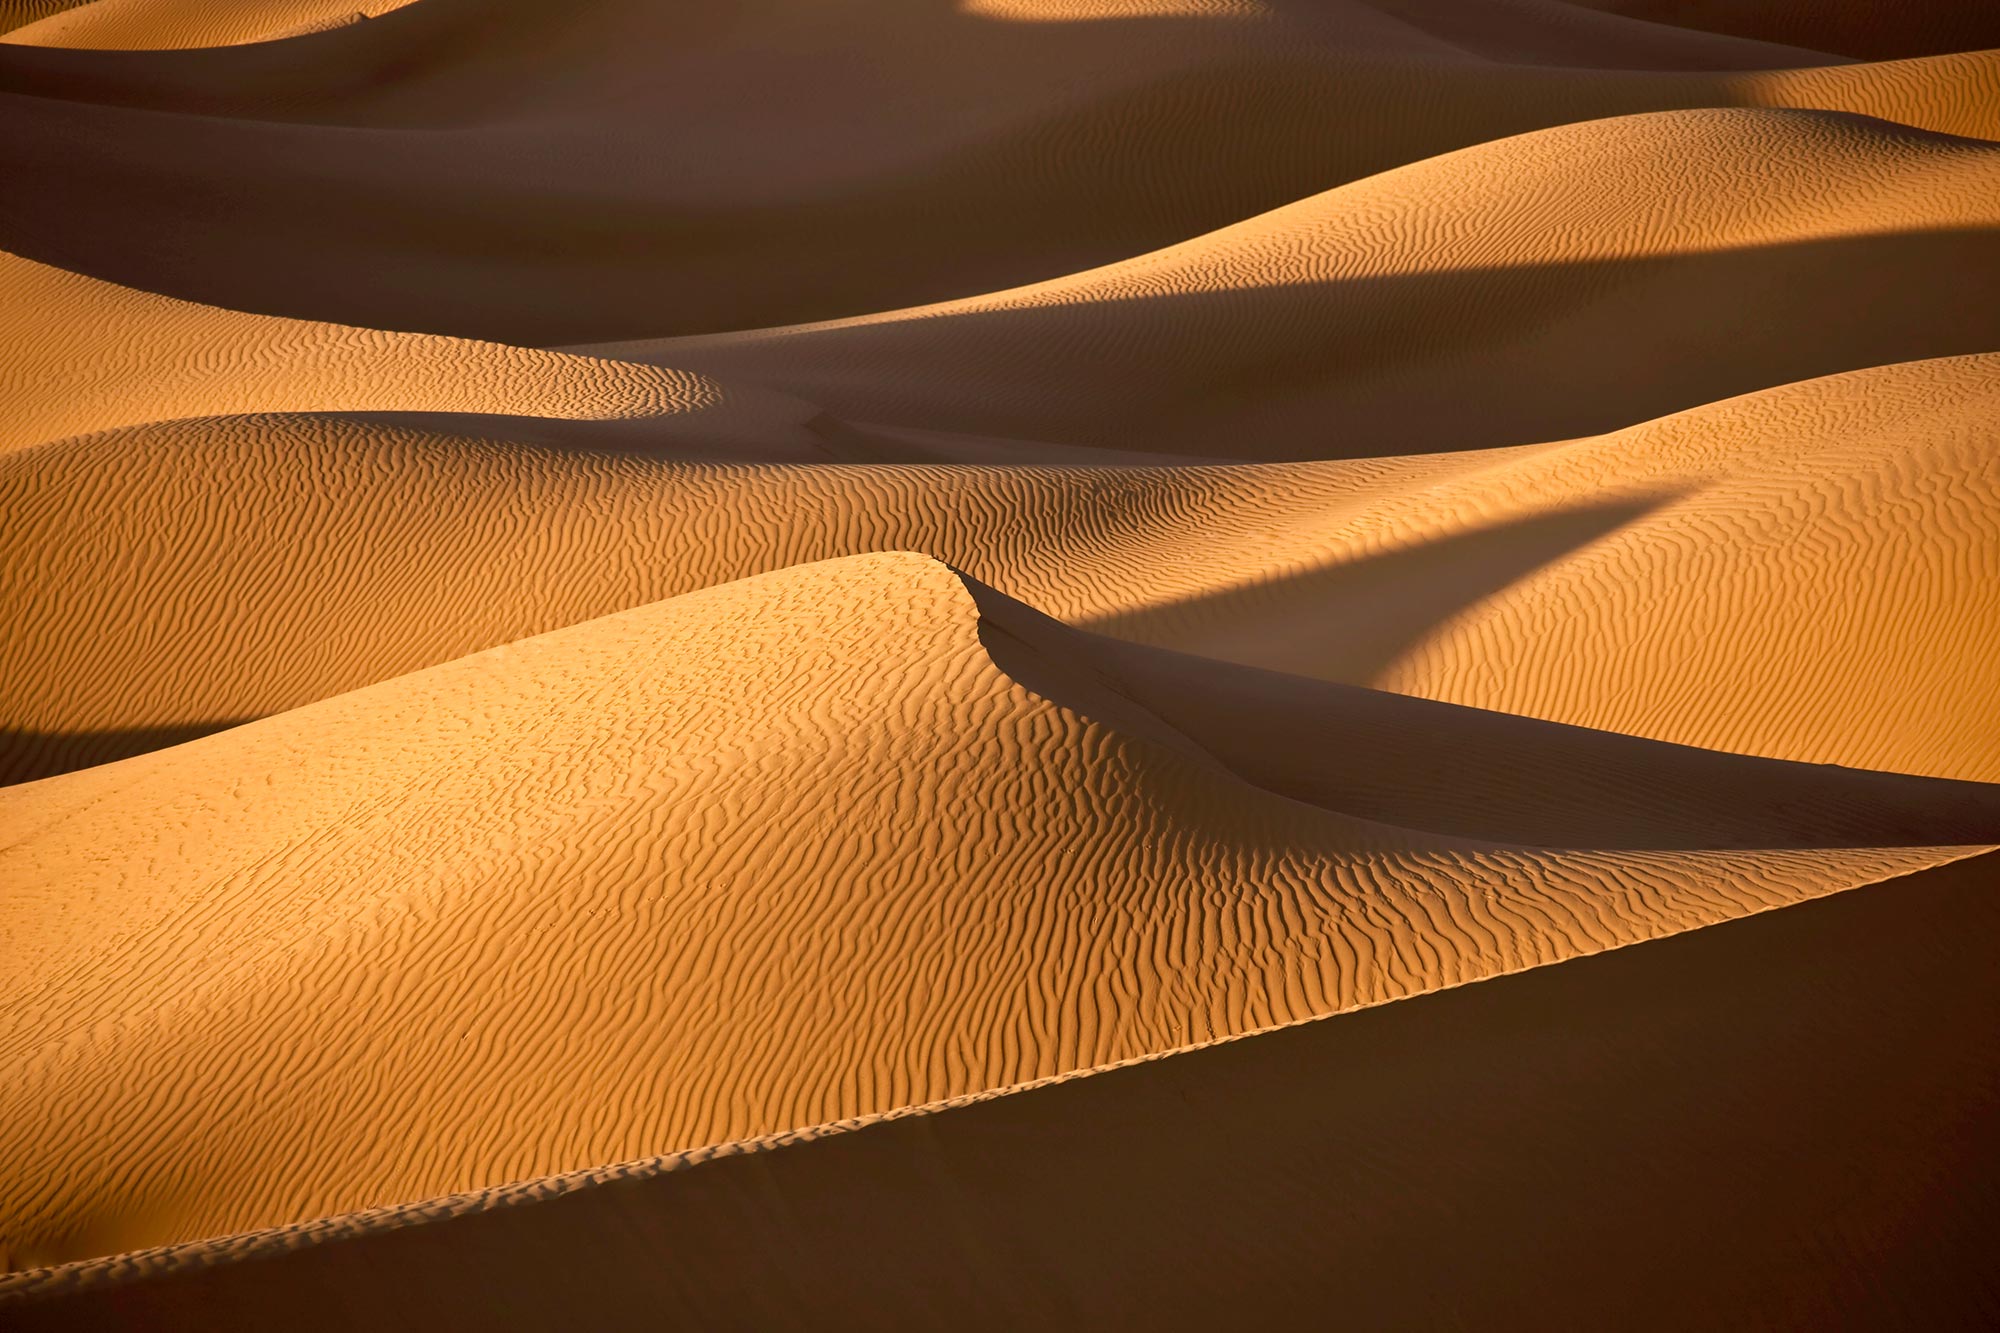 Physics Researchers Discover Sand Dunes Can 'Communicate' With Each Other